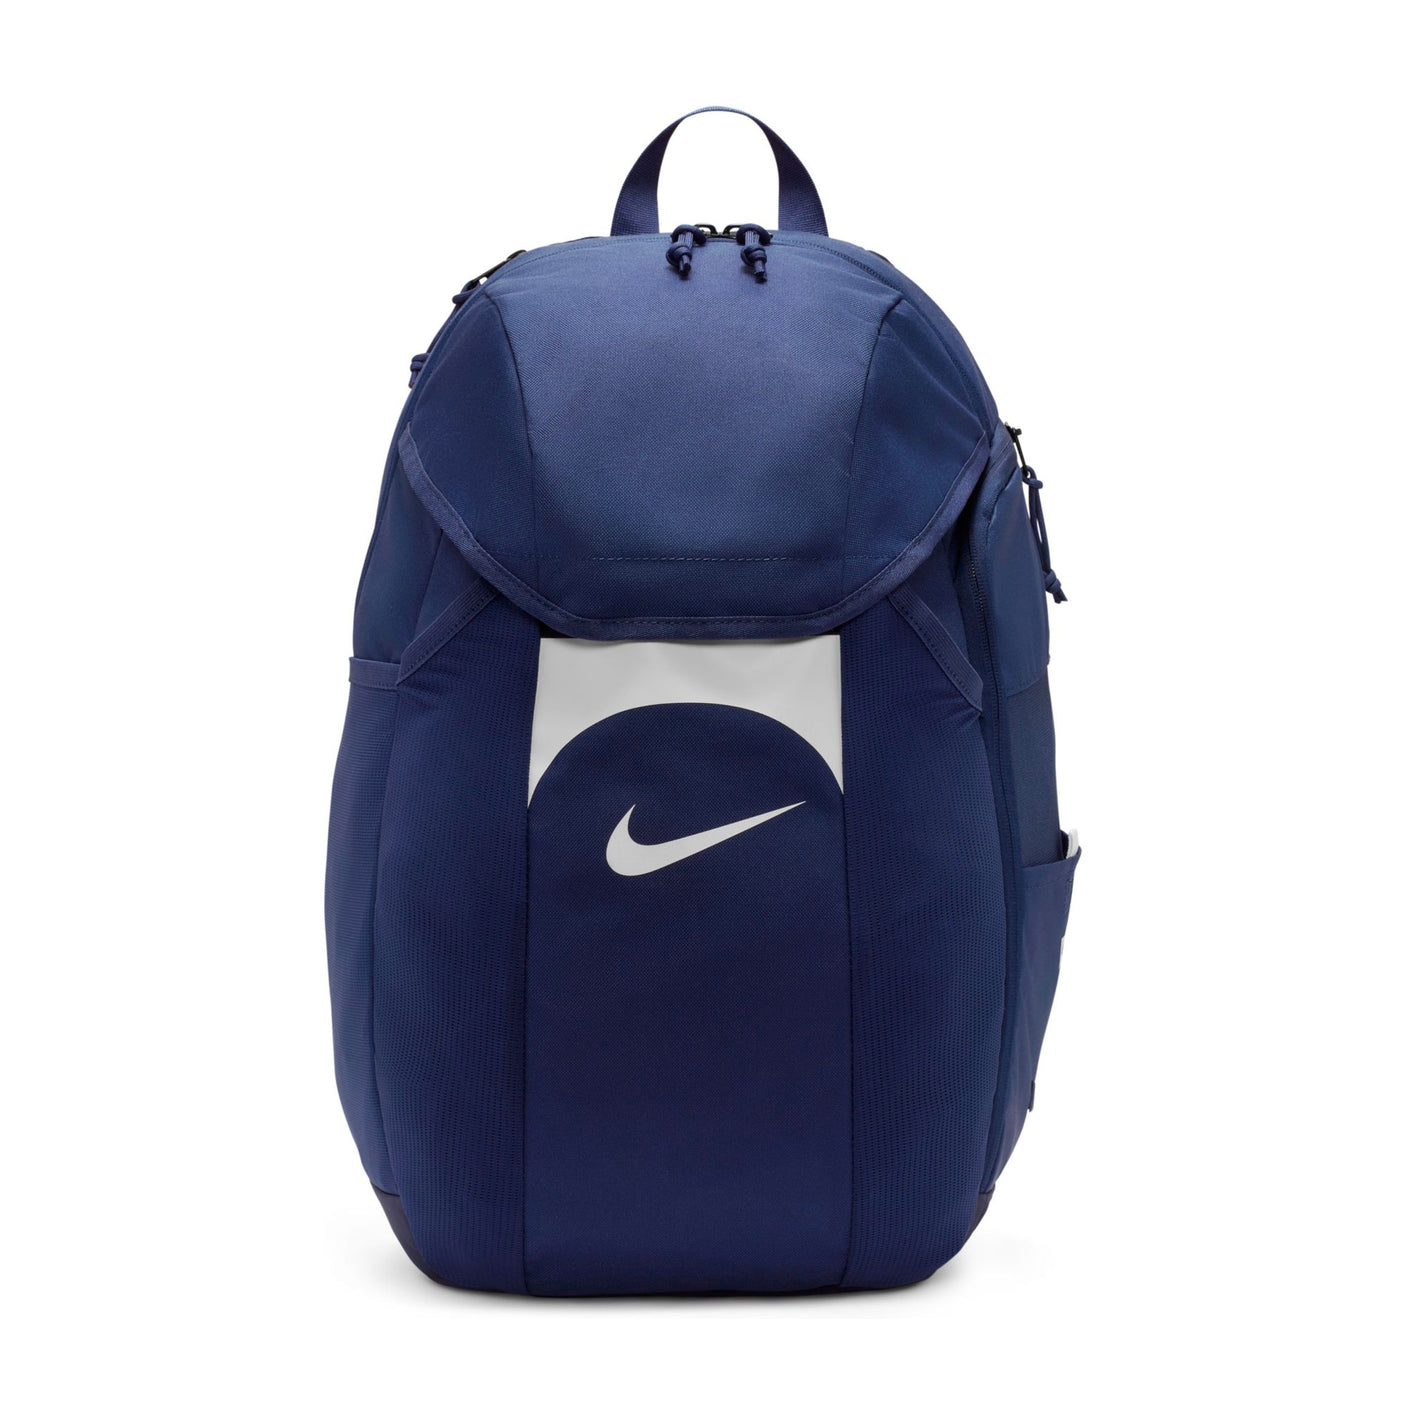 Nike Academy Team Backpack Navy/White Front